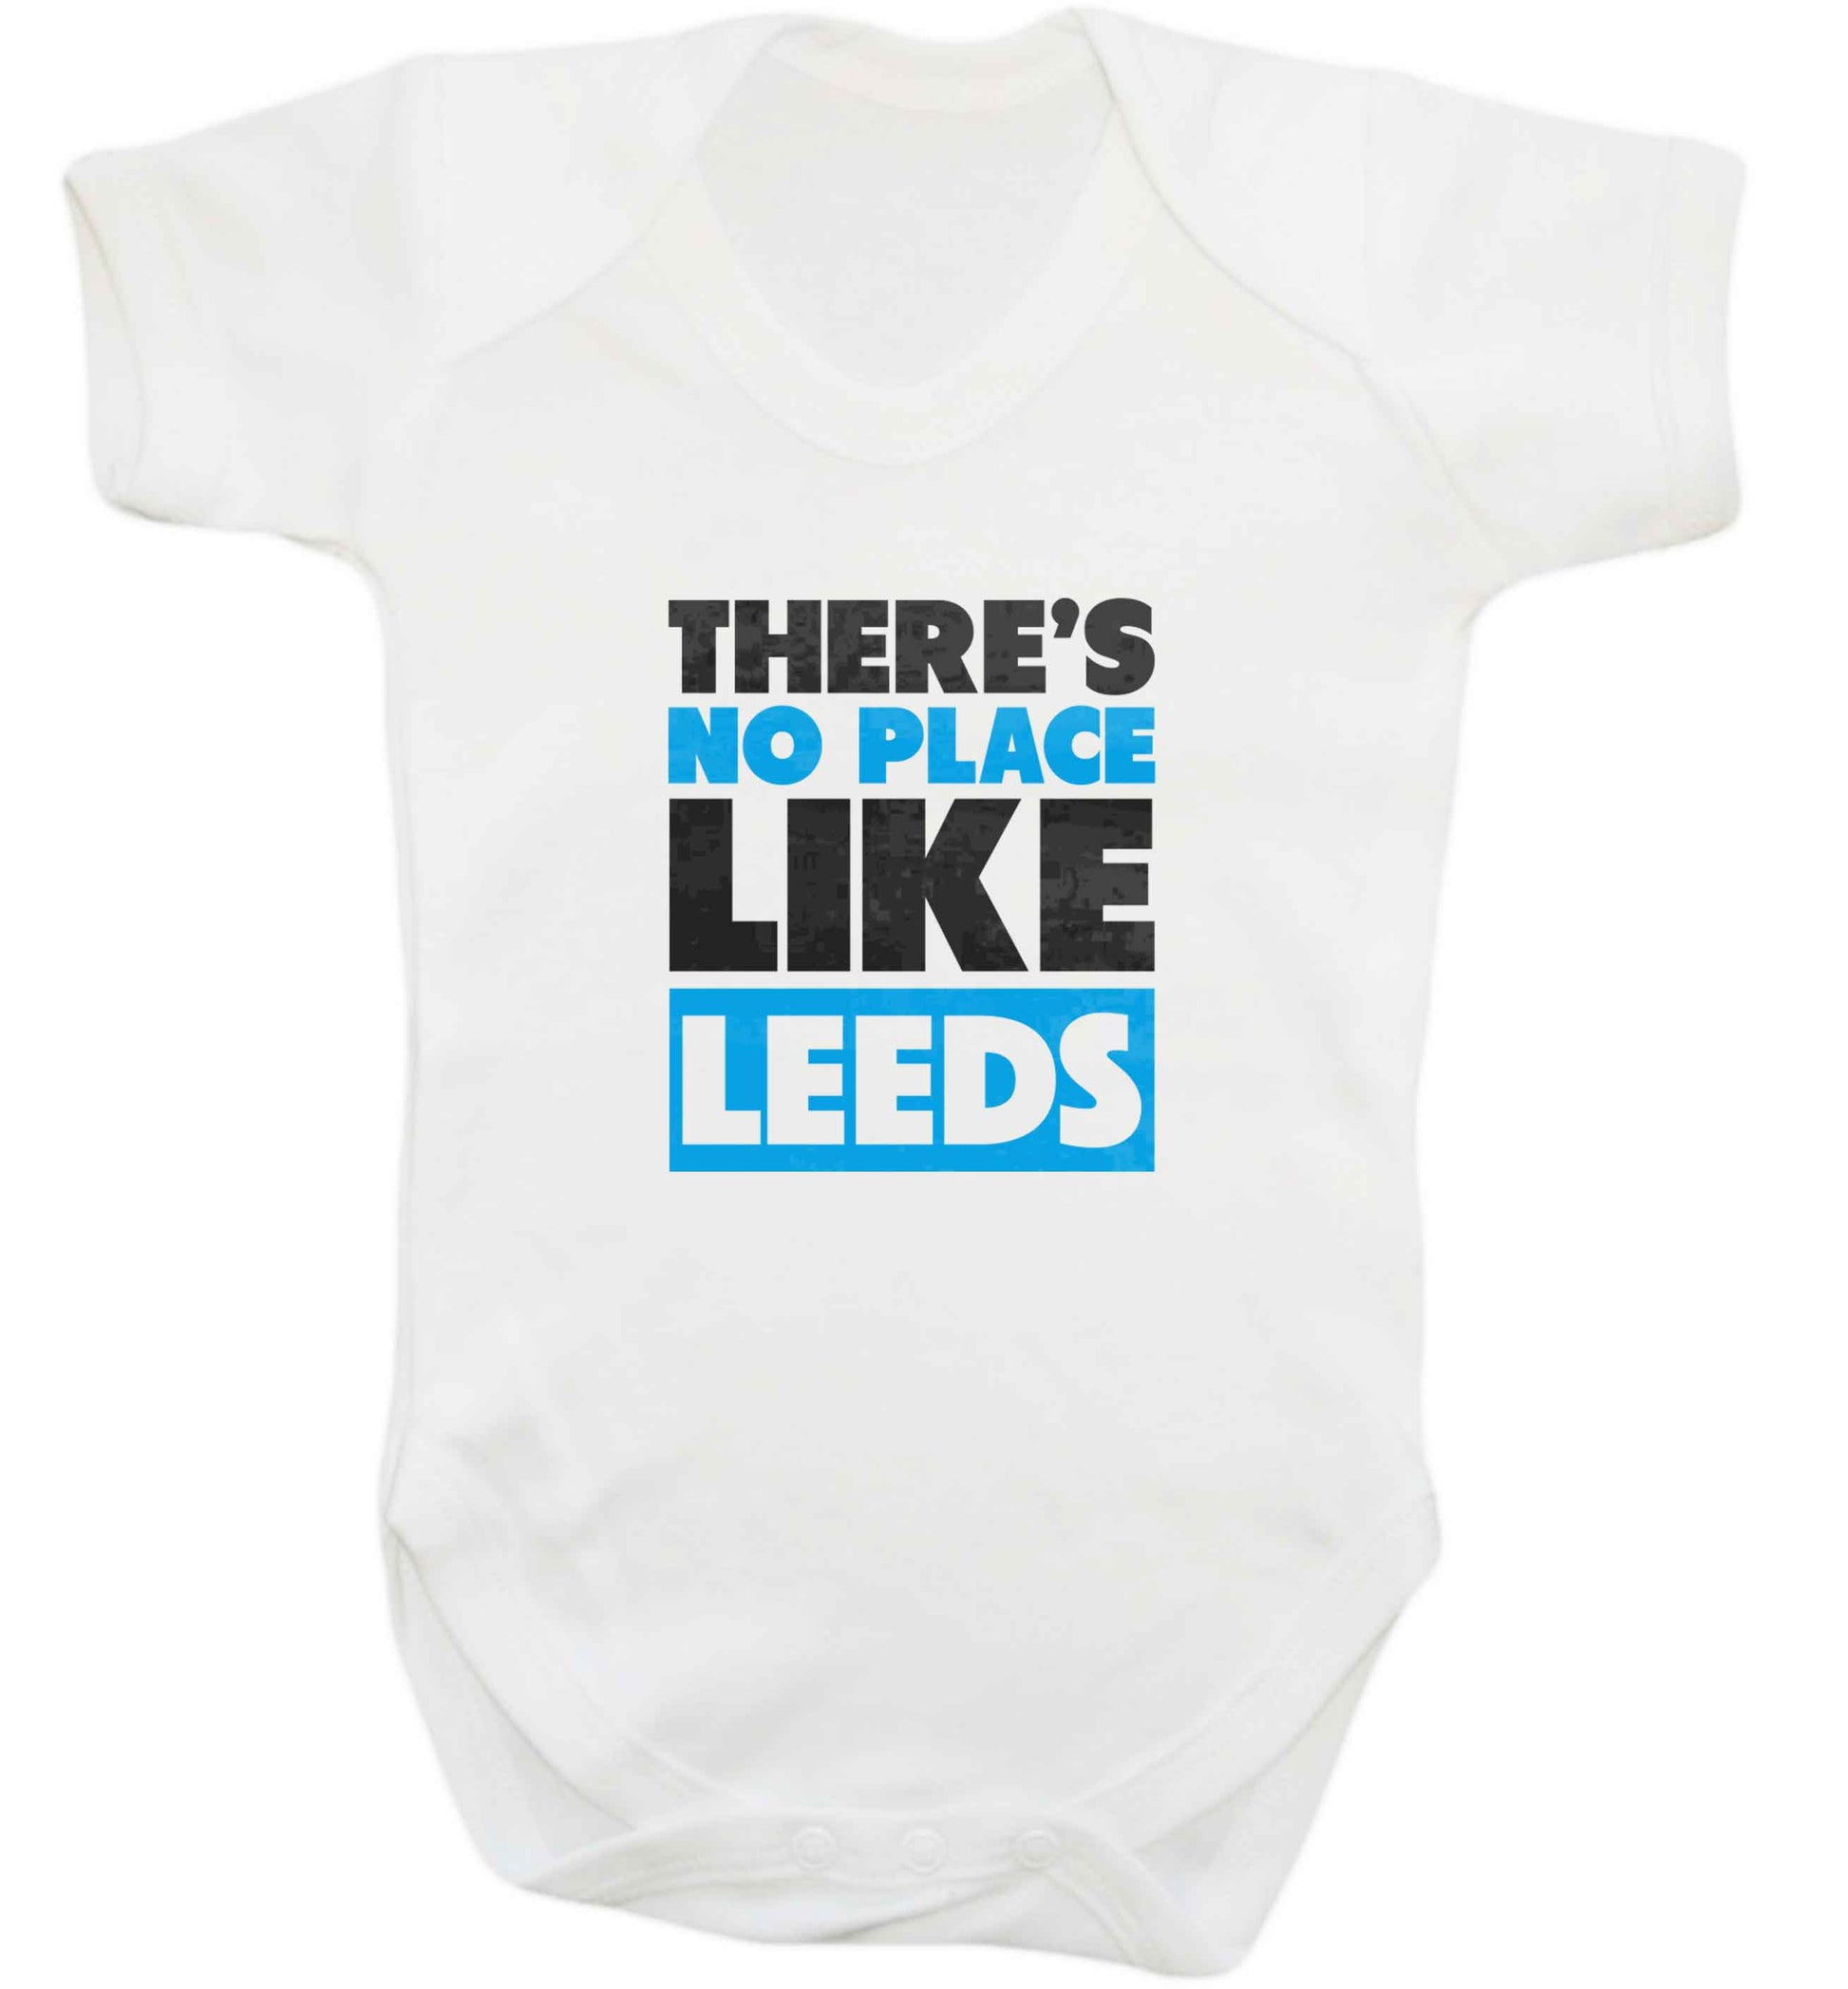 There's no place like Leeds baby vest white 18-24 months